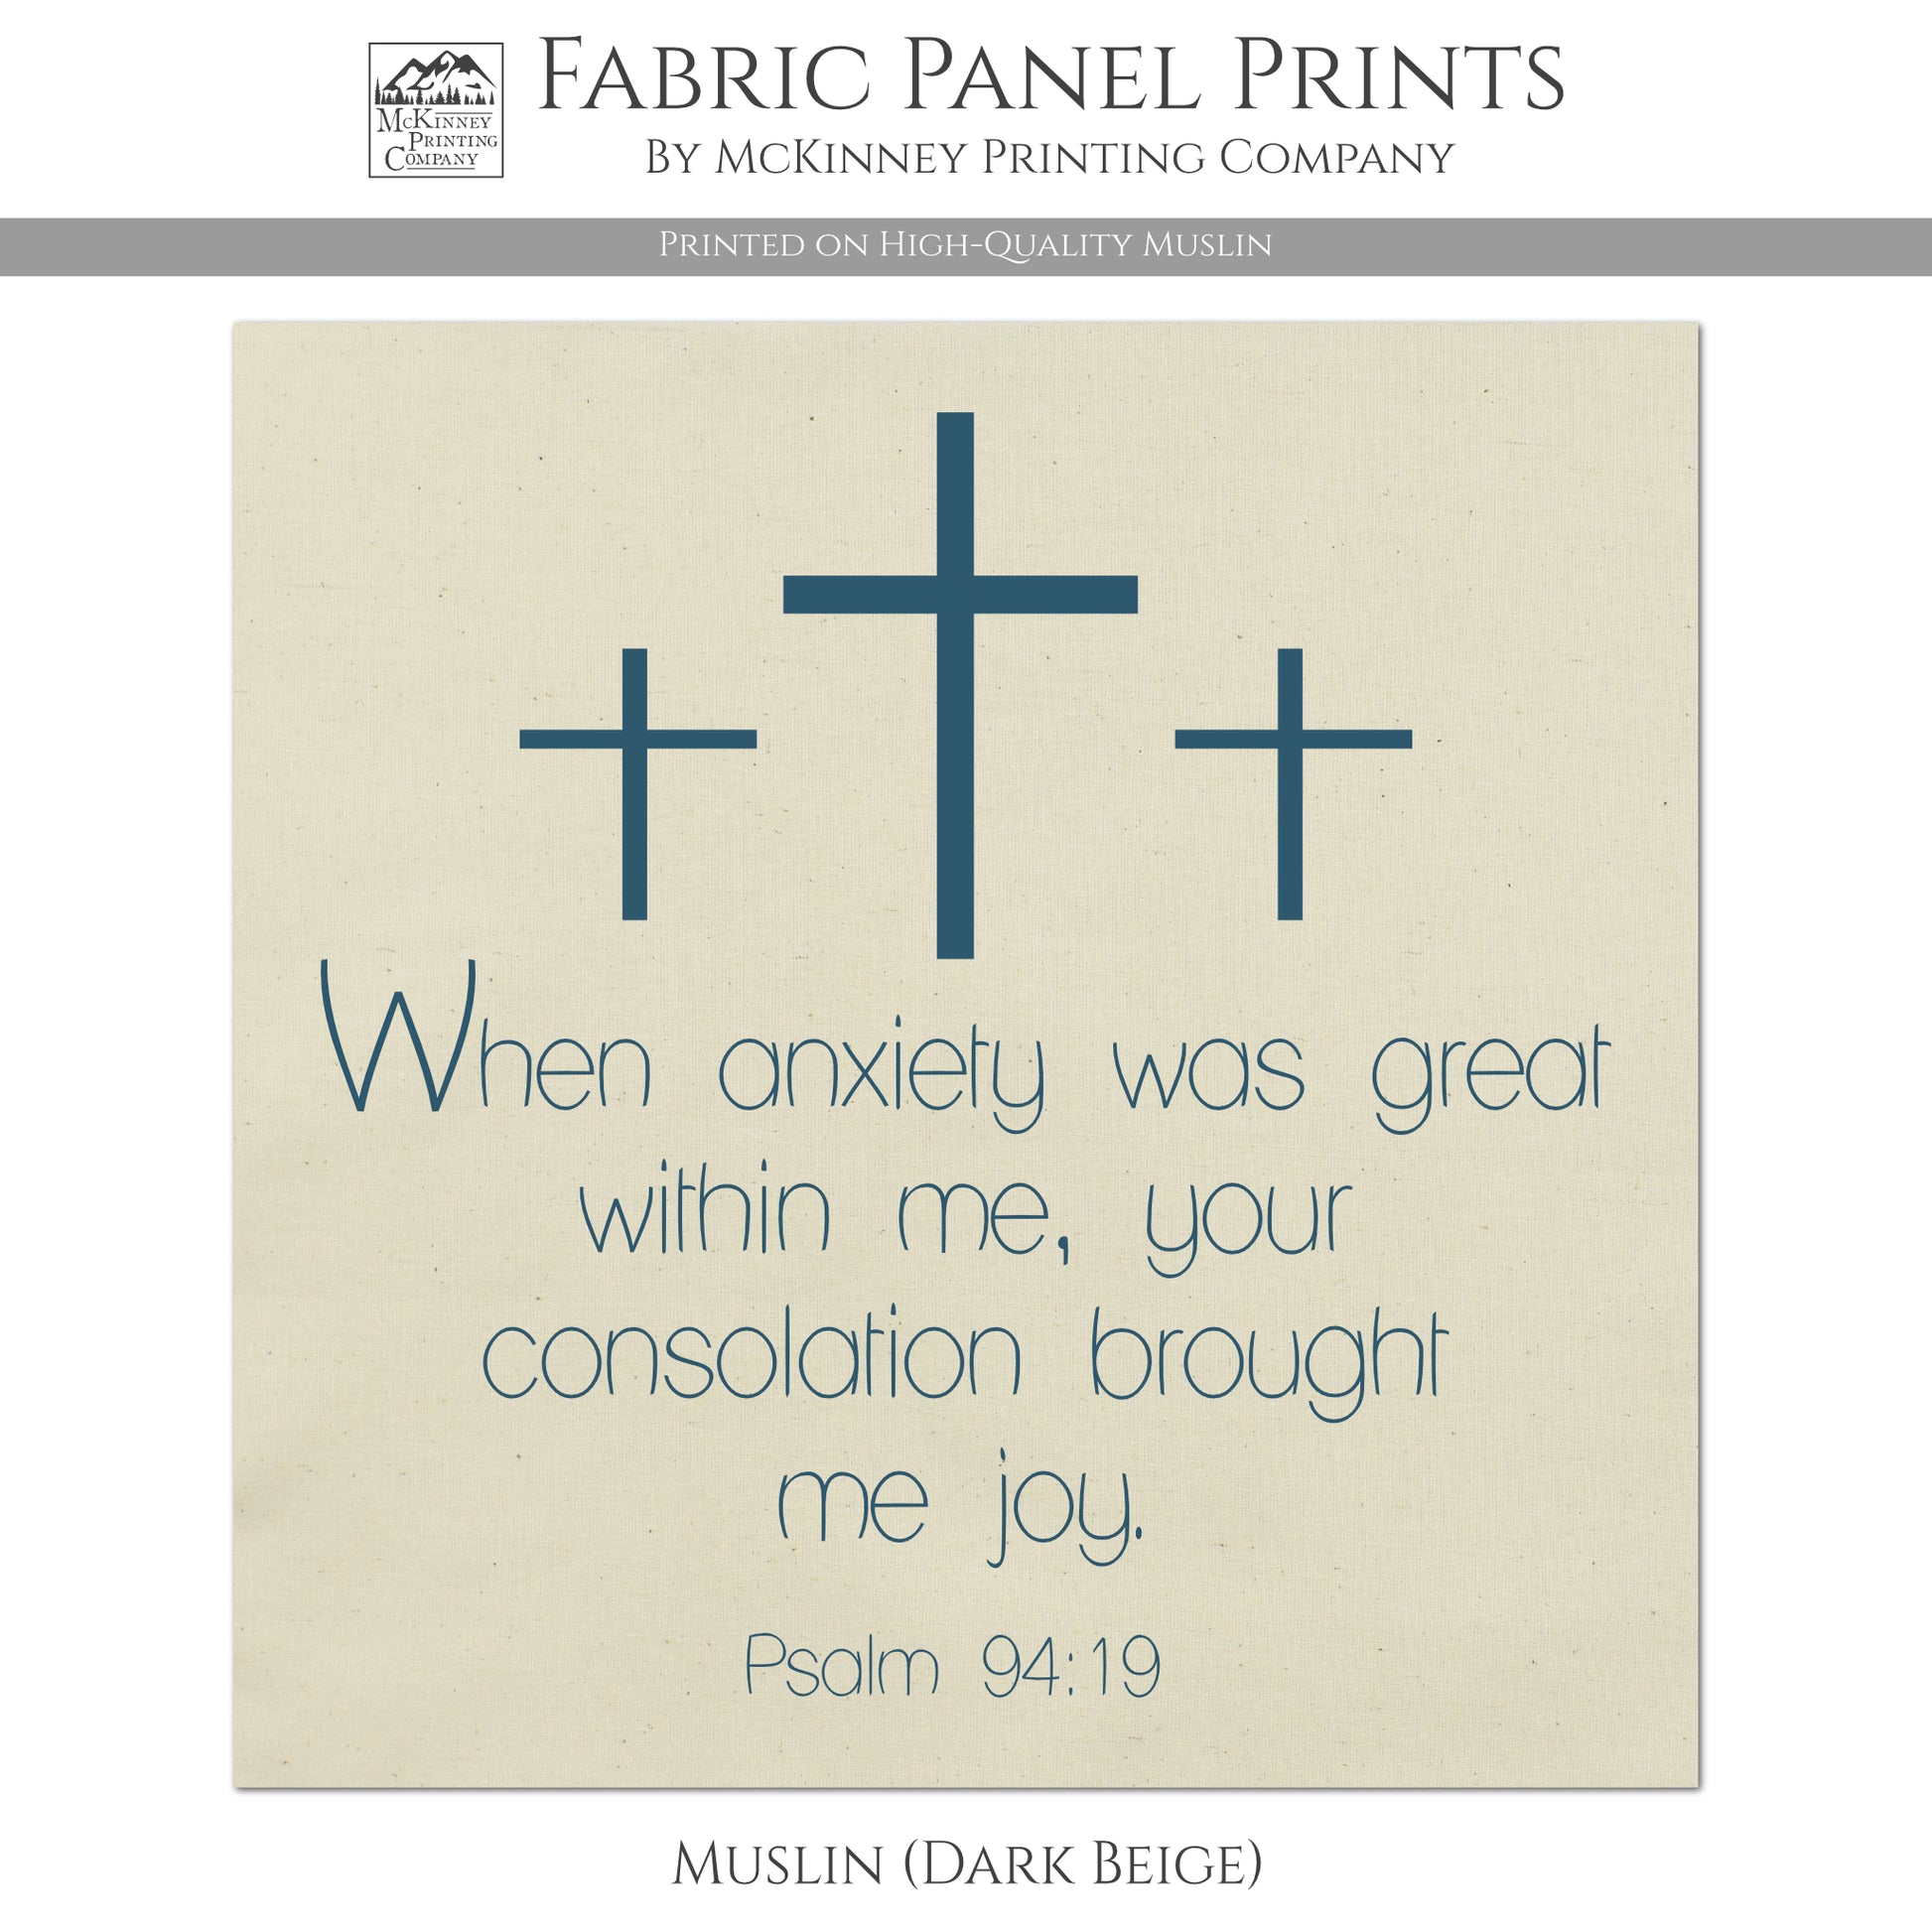 Psalm 94 19 - When anxiety was great within me, your consolation brought me joy. - Muslin